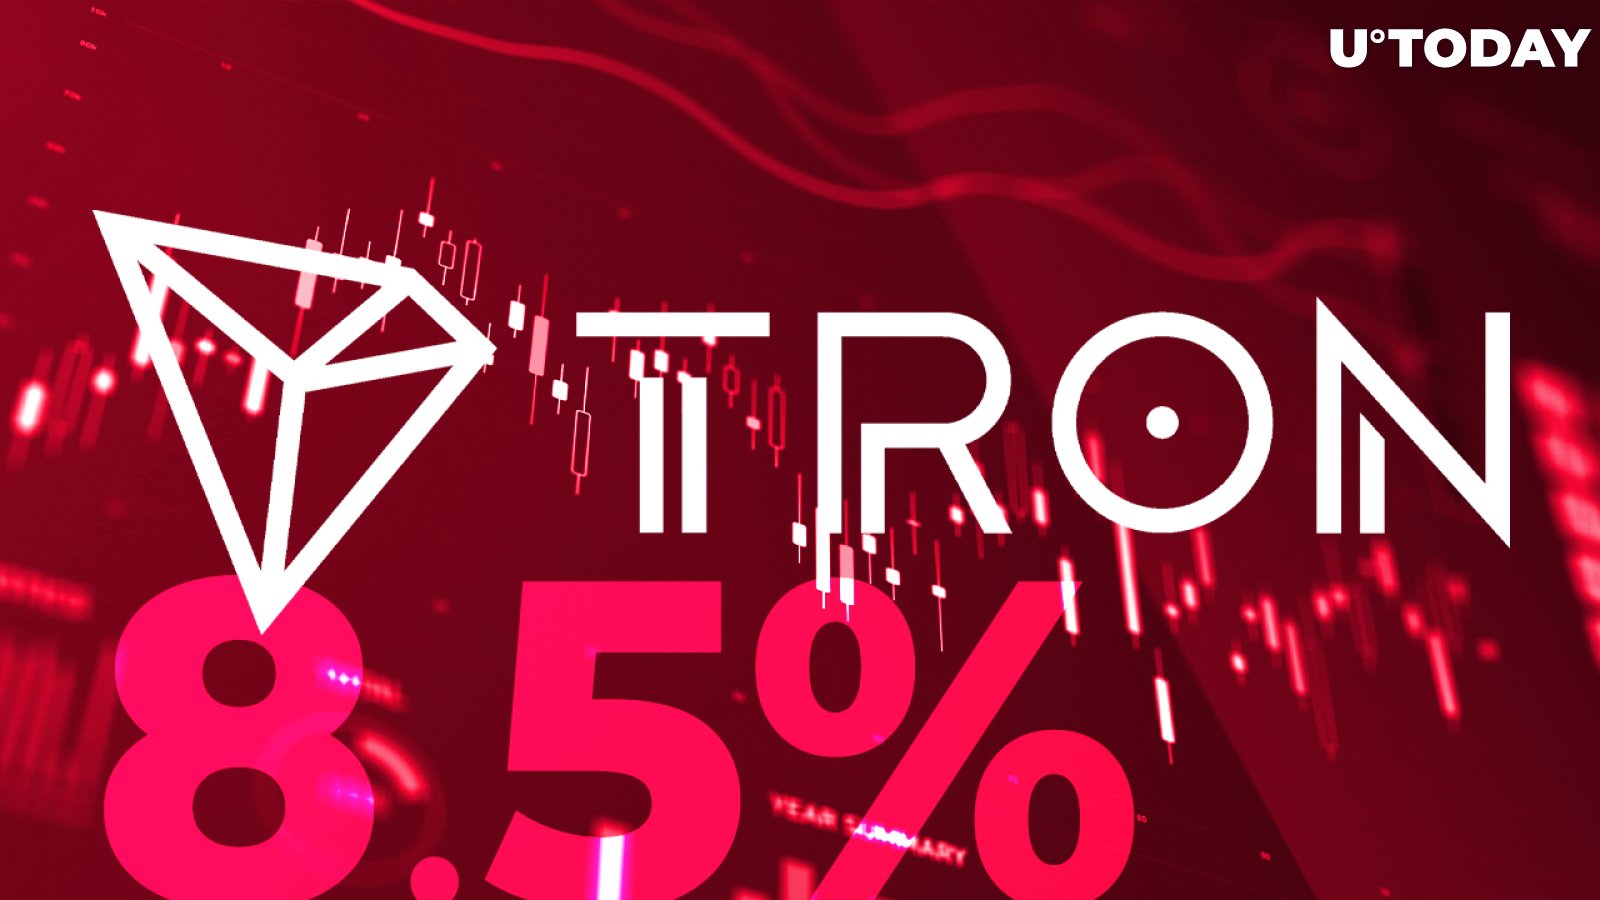 Tron (TRX) Price Spikes 8.5% After Binance US Listing